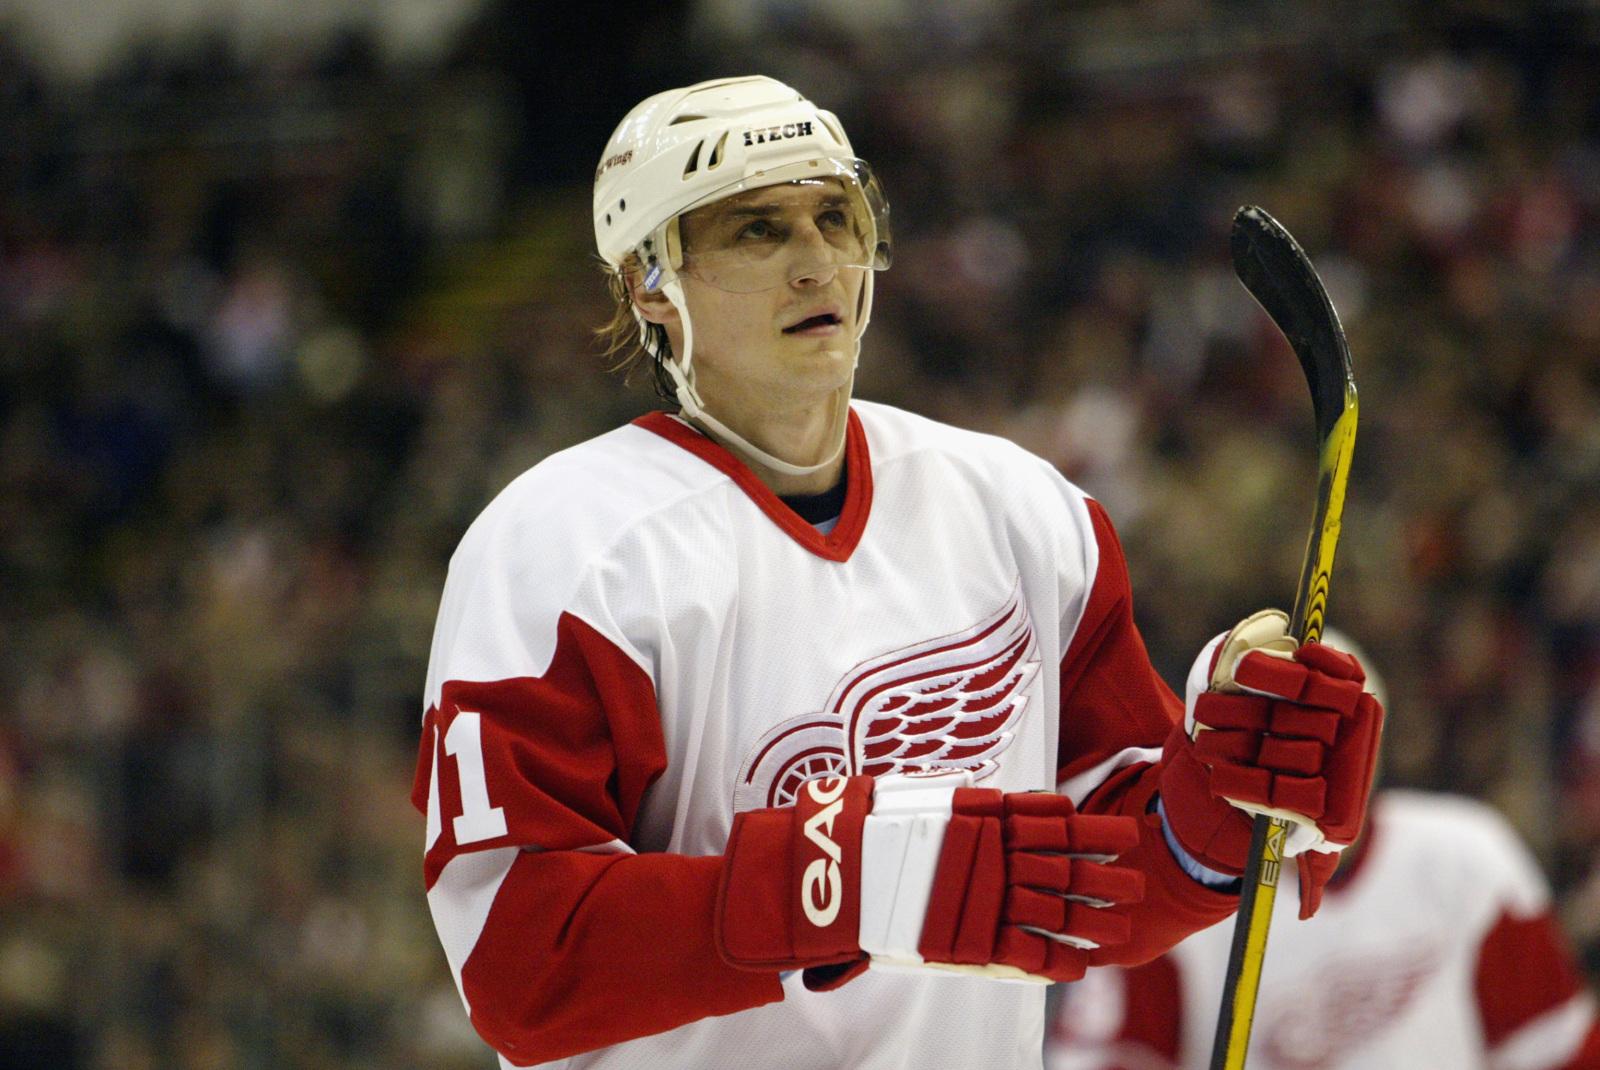 Report: Former Red Wing Sergei Fedorov to retire and become GM of